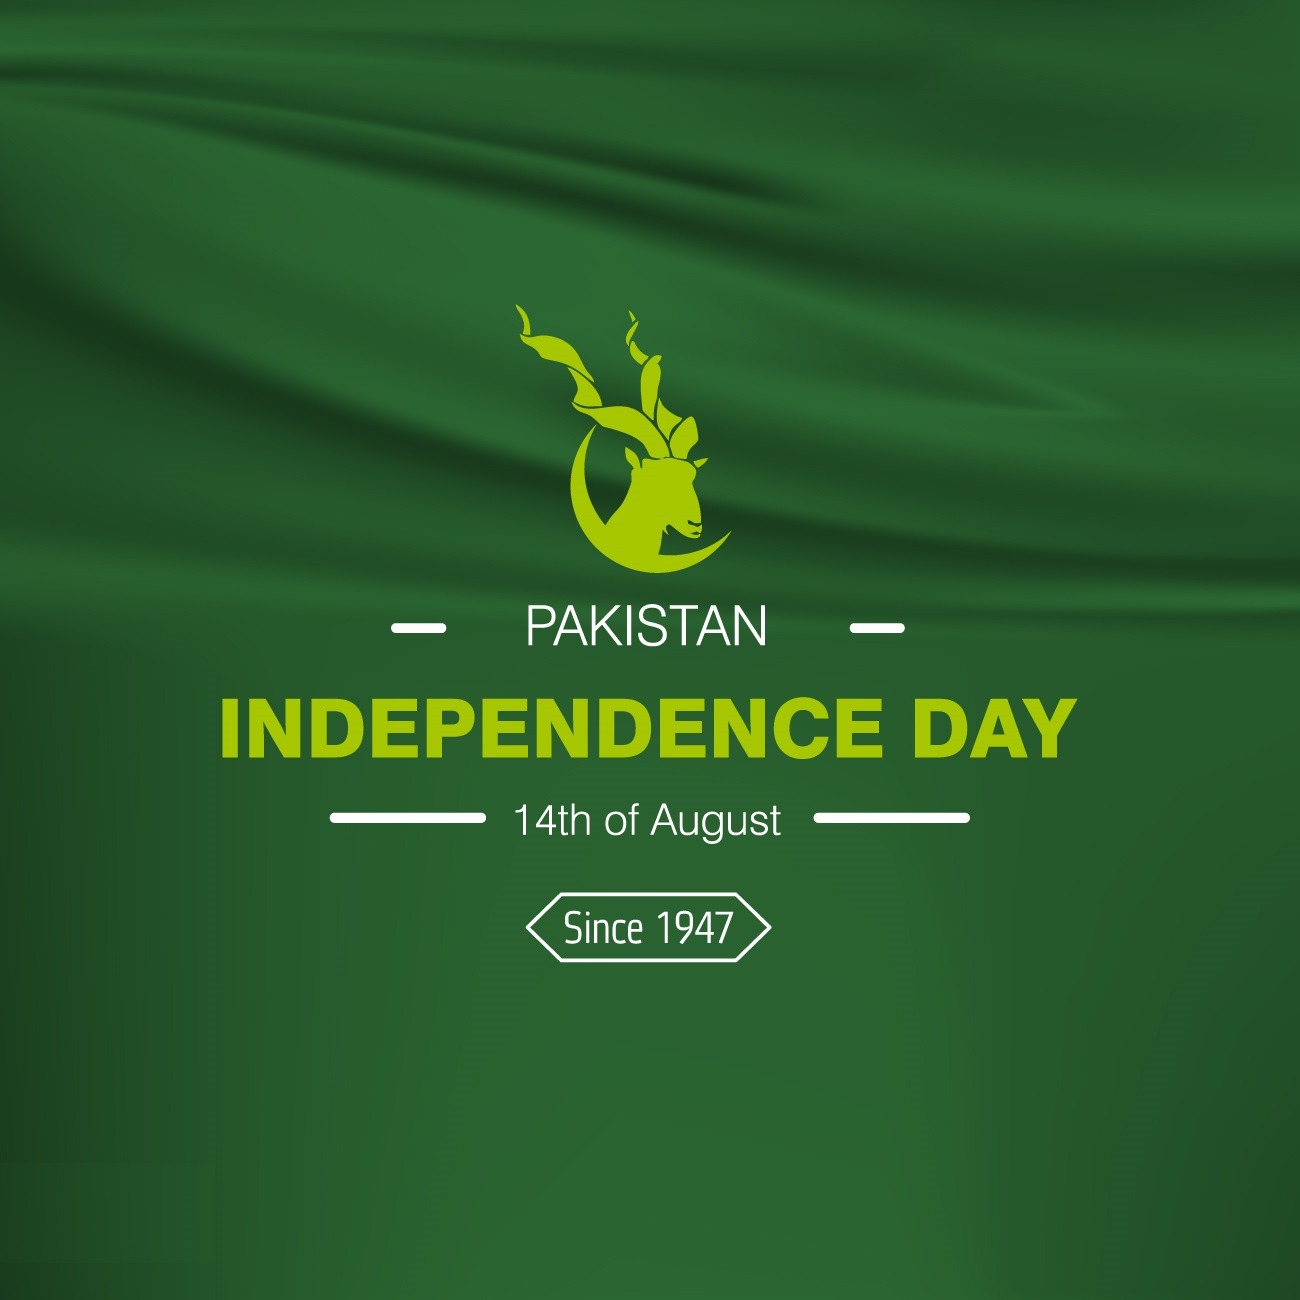 Happy Independence Day (14 August) 2021 Image Free Download